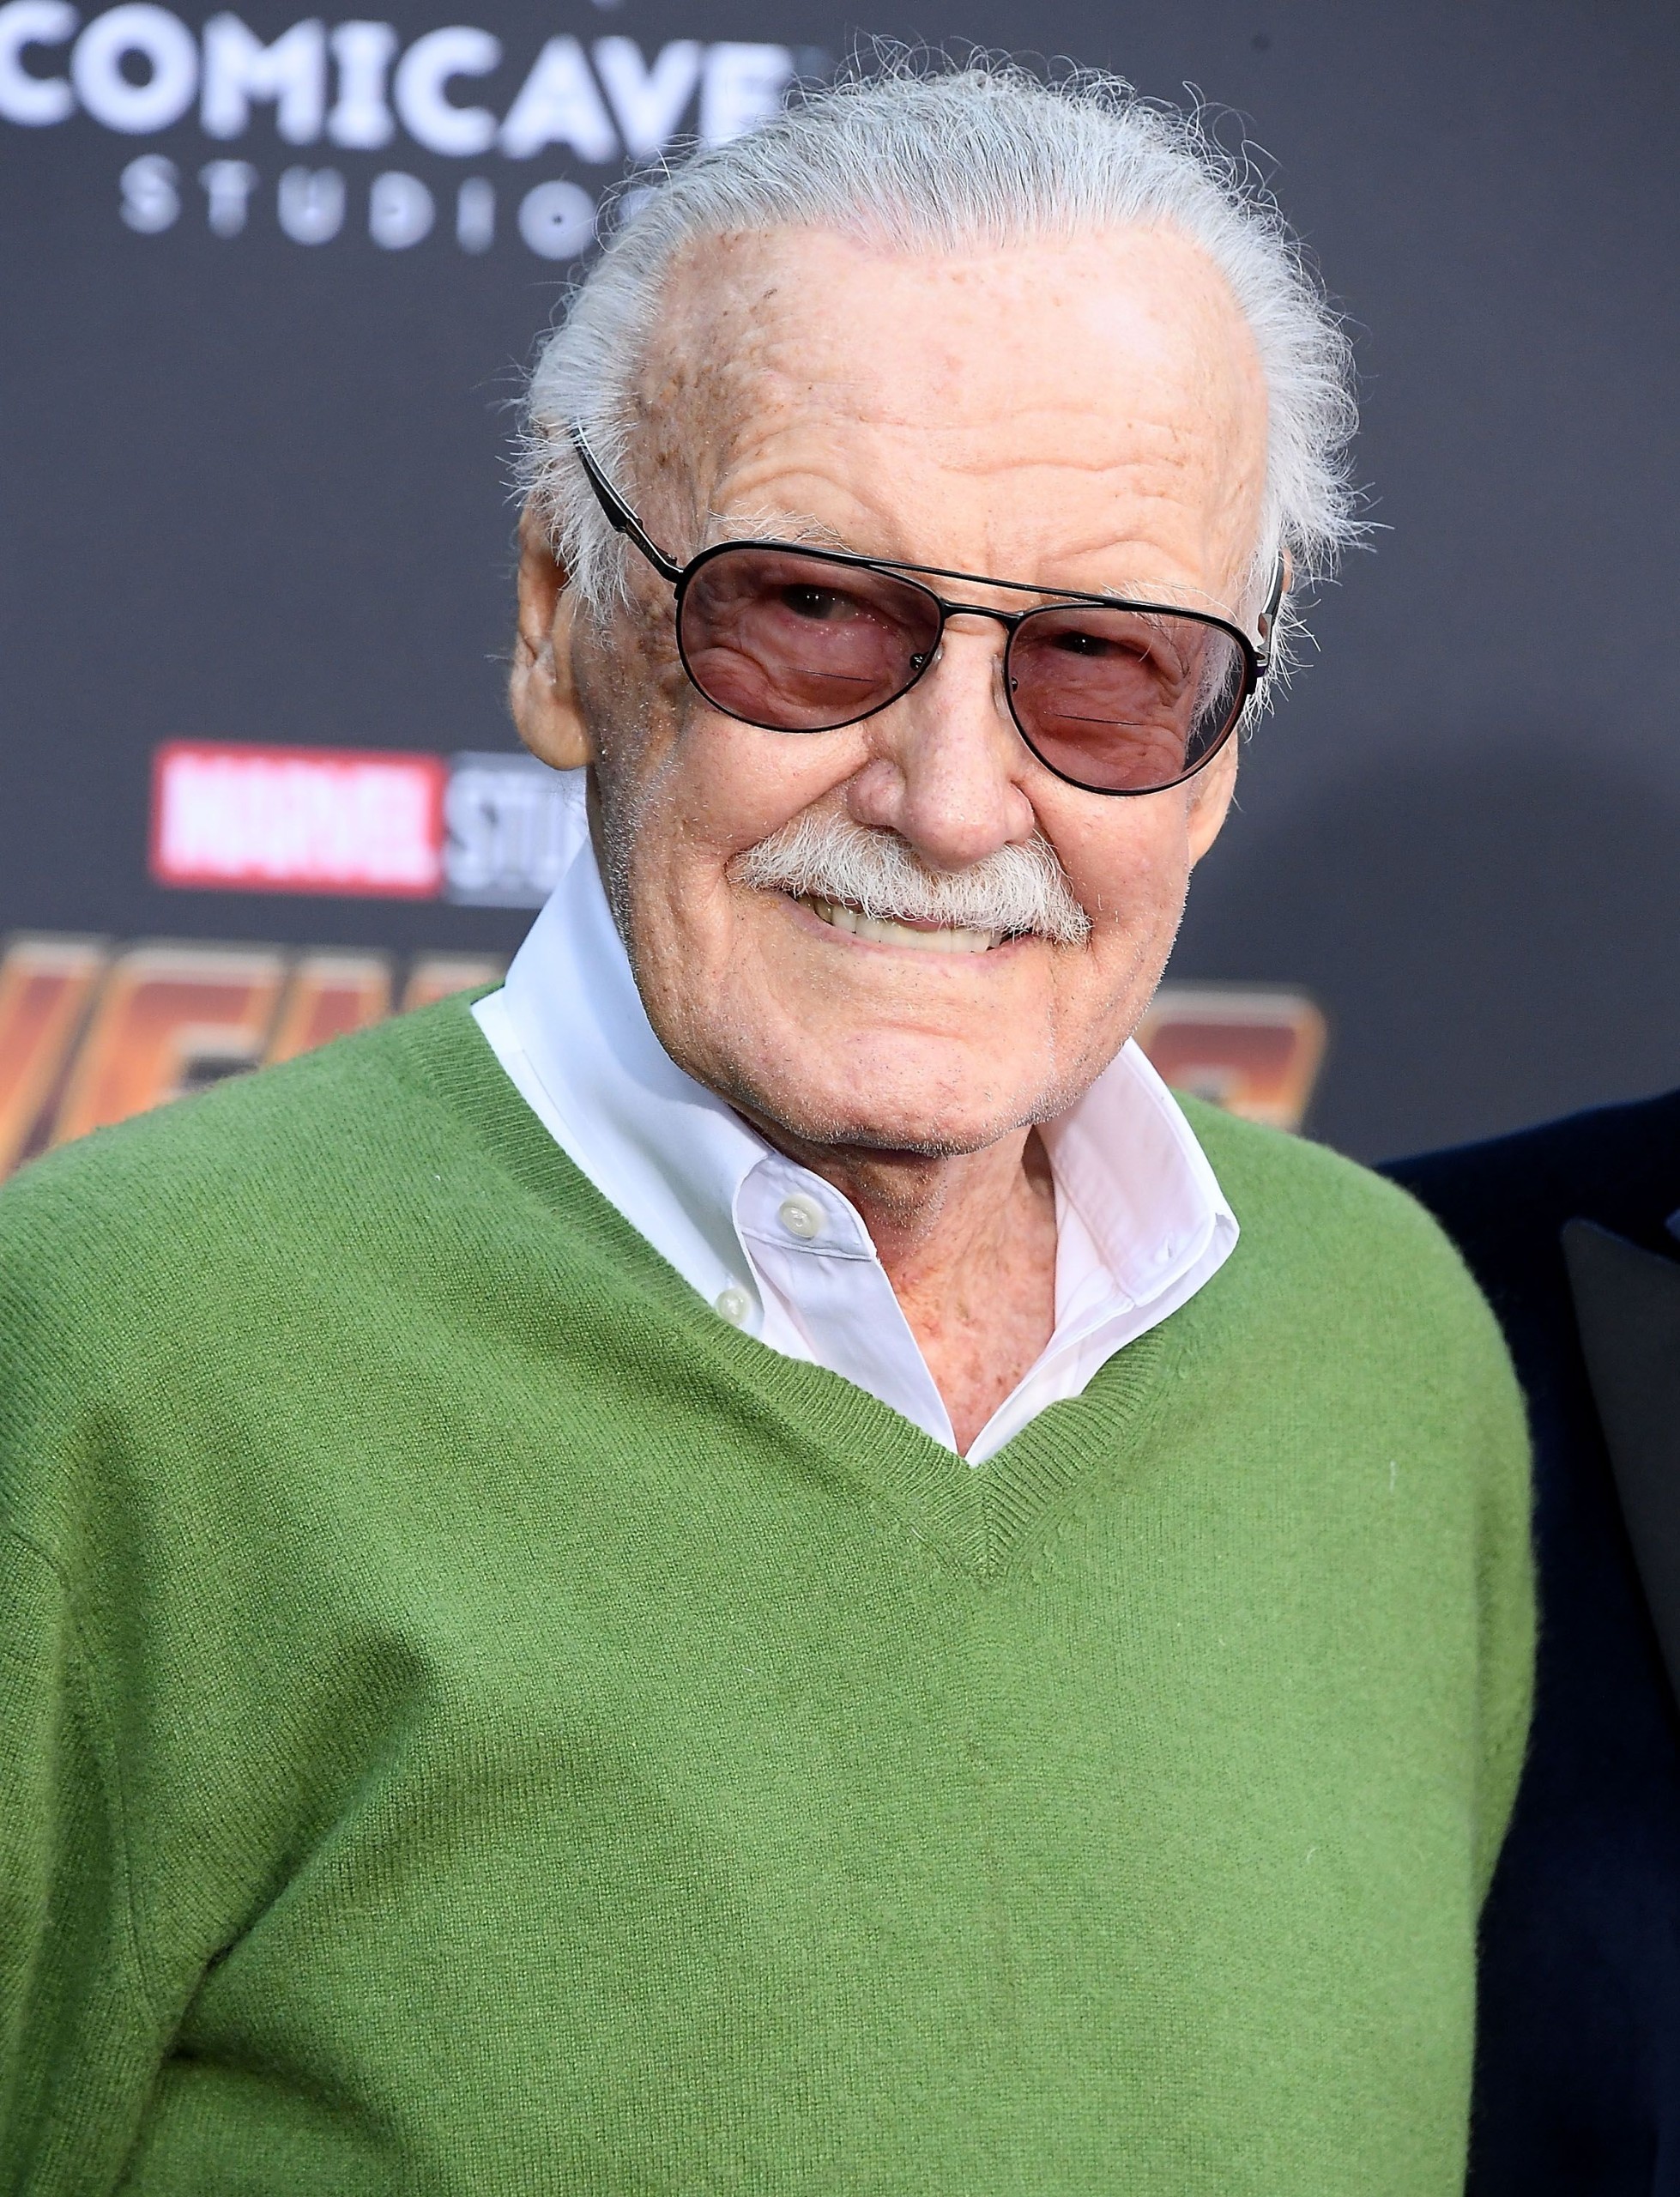 Stan Lee American Comic Book Writer, Editor, Publisher, Actor, Television Host